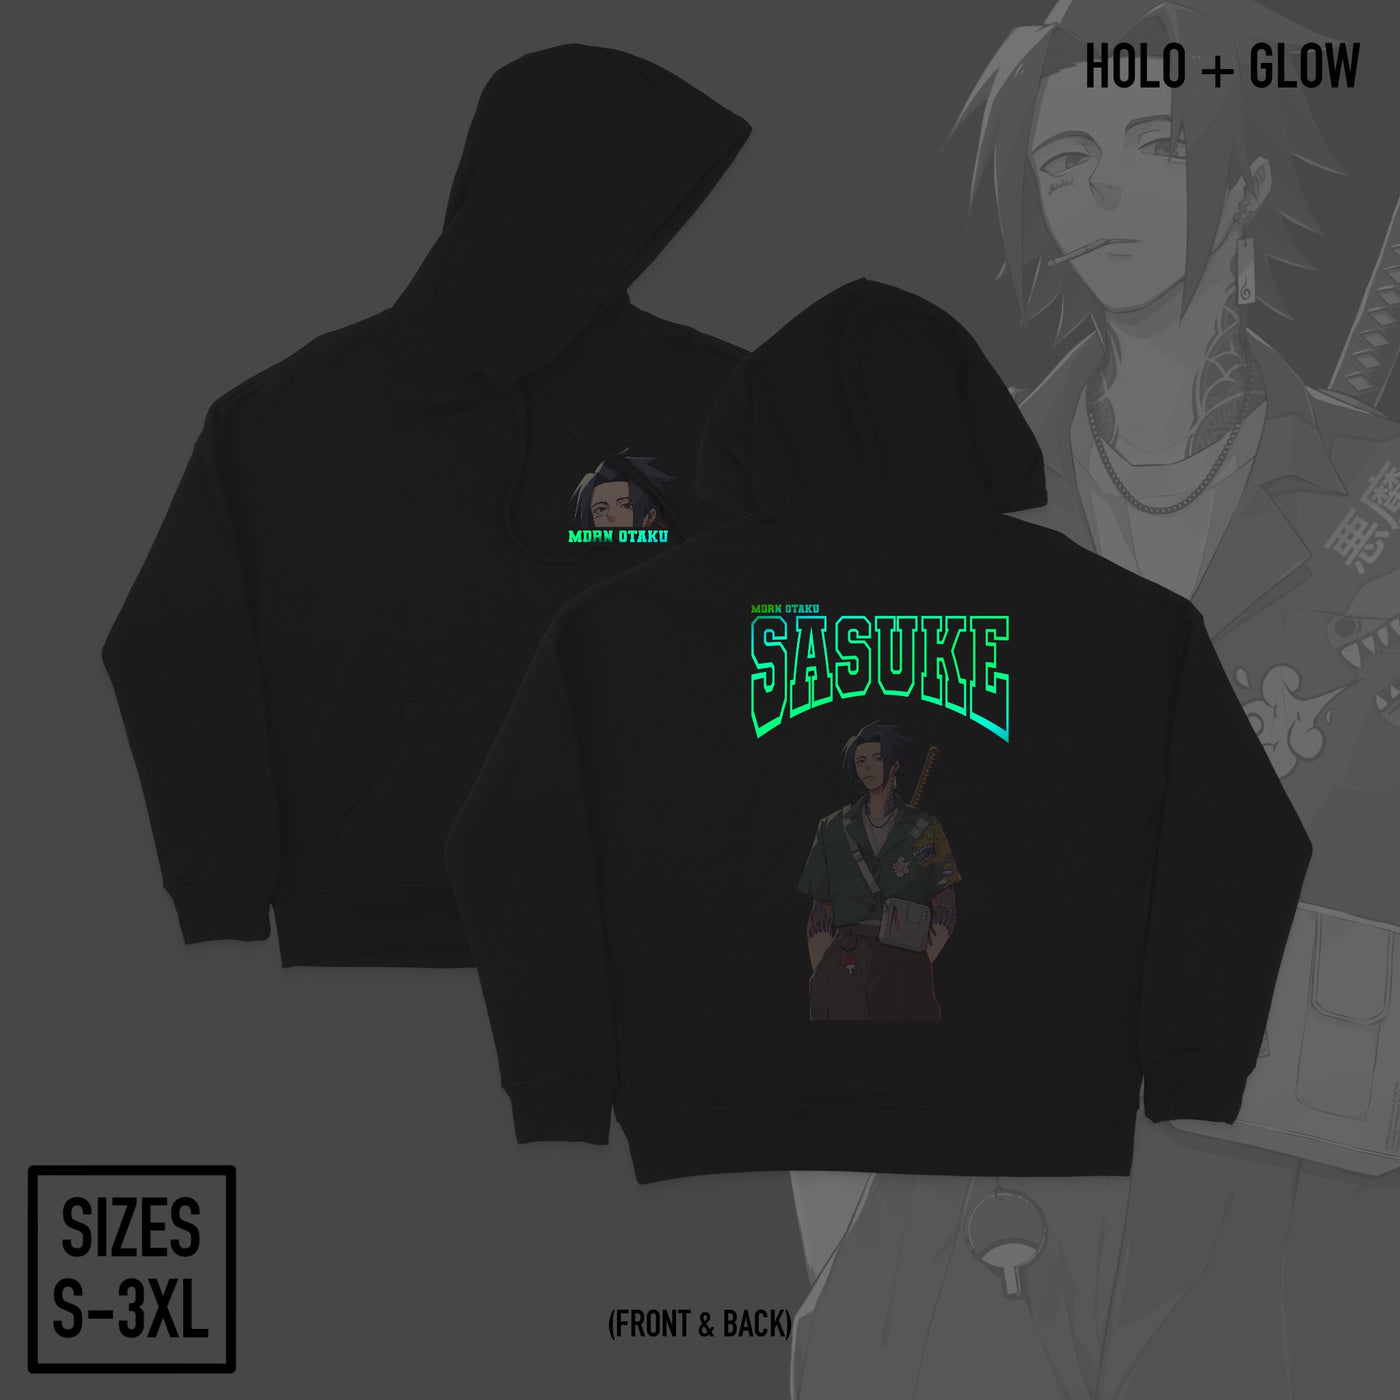 Supporting Kage | Hoodie - HOLO + GLOW in the Dark